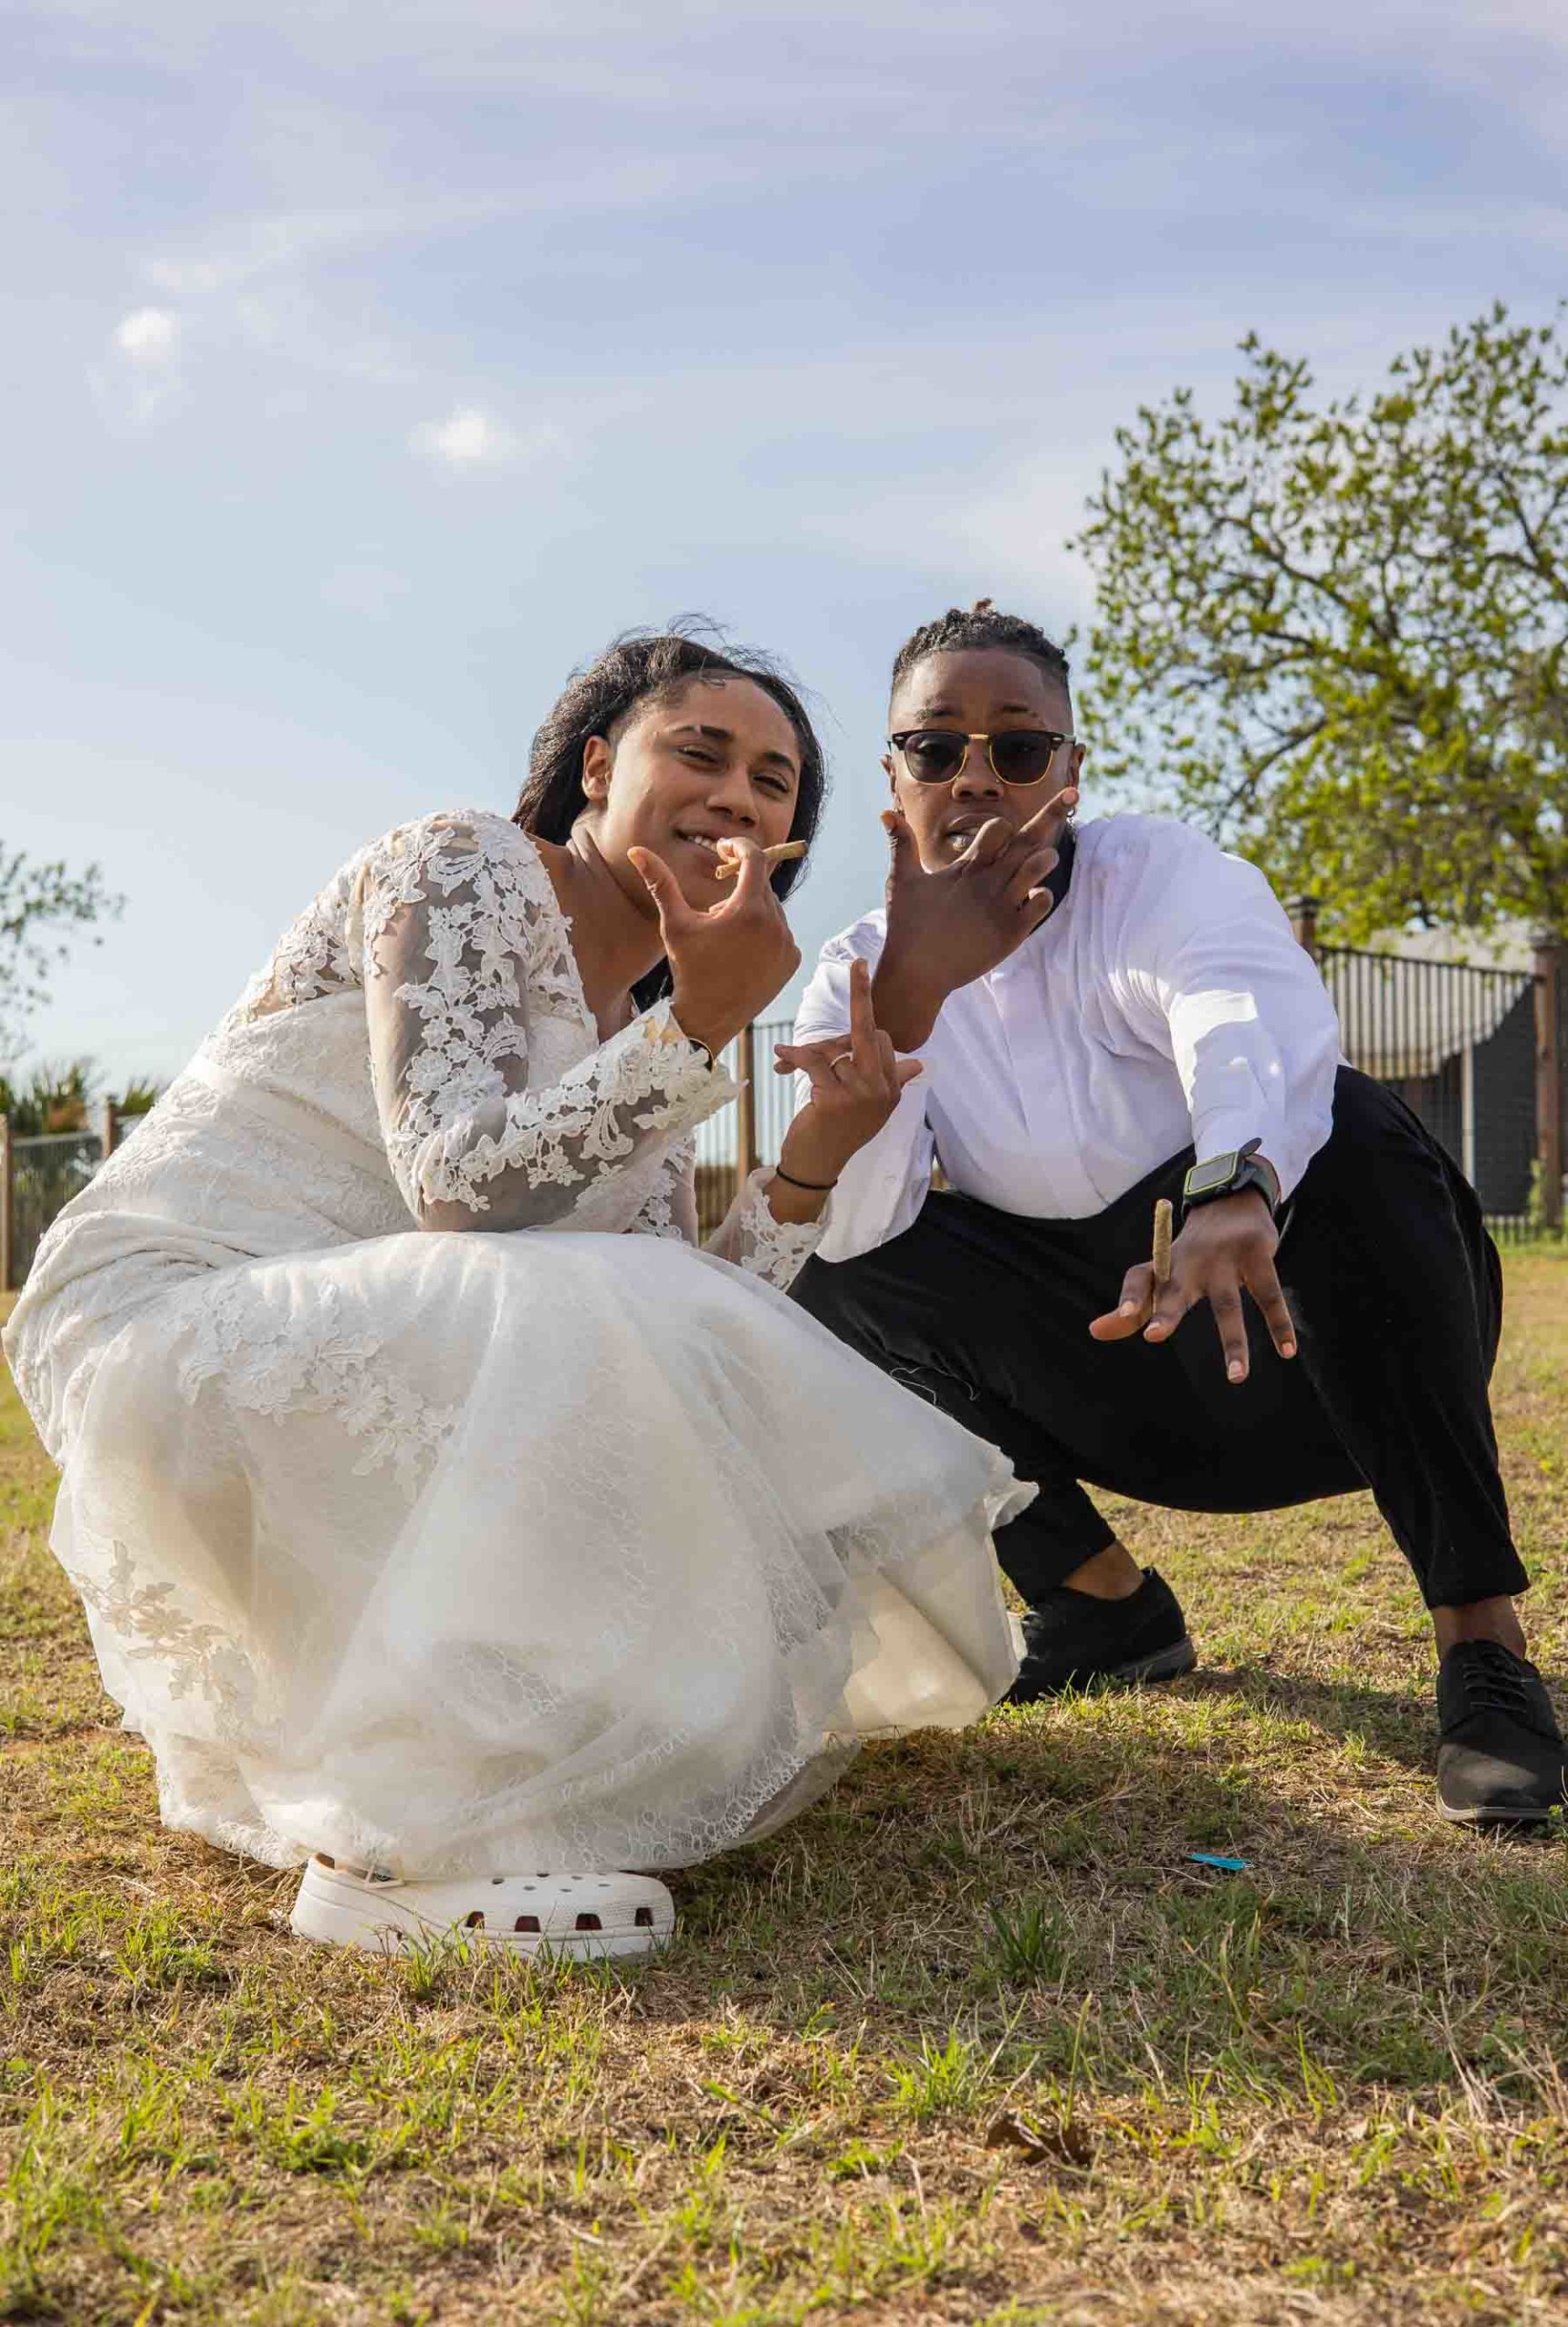 Black lesbian bride and Black wedding officiant squat down holding weed blunts, shooting birds with their fingers and look at camera